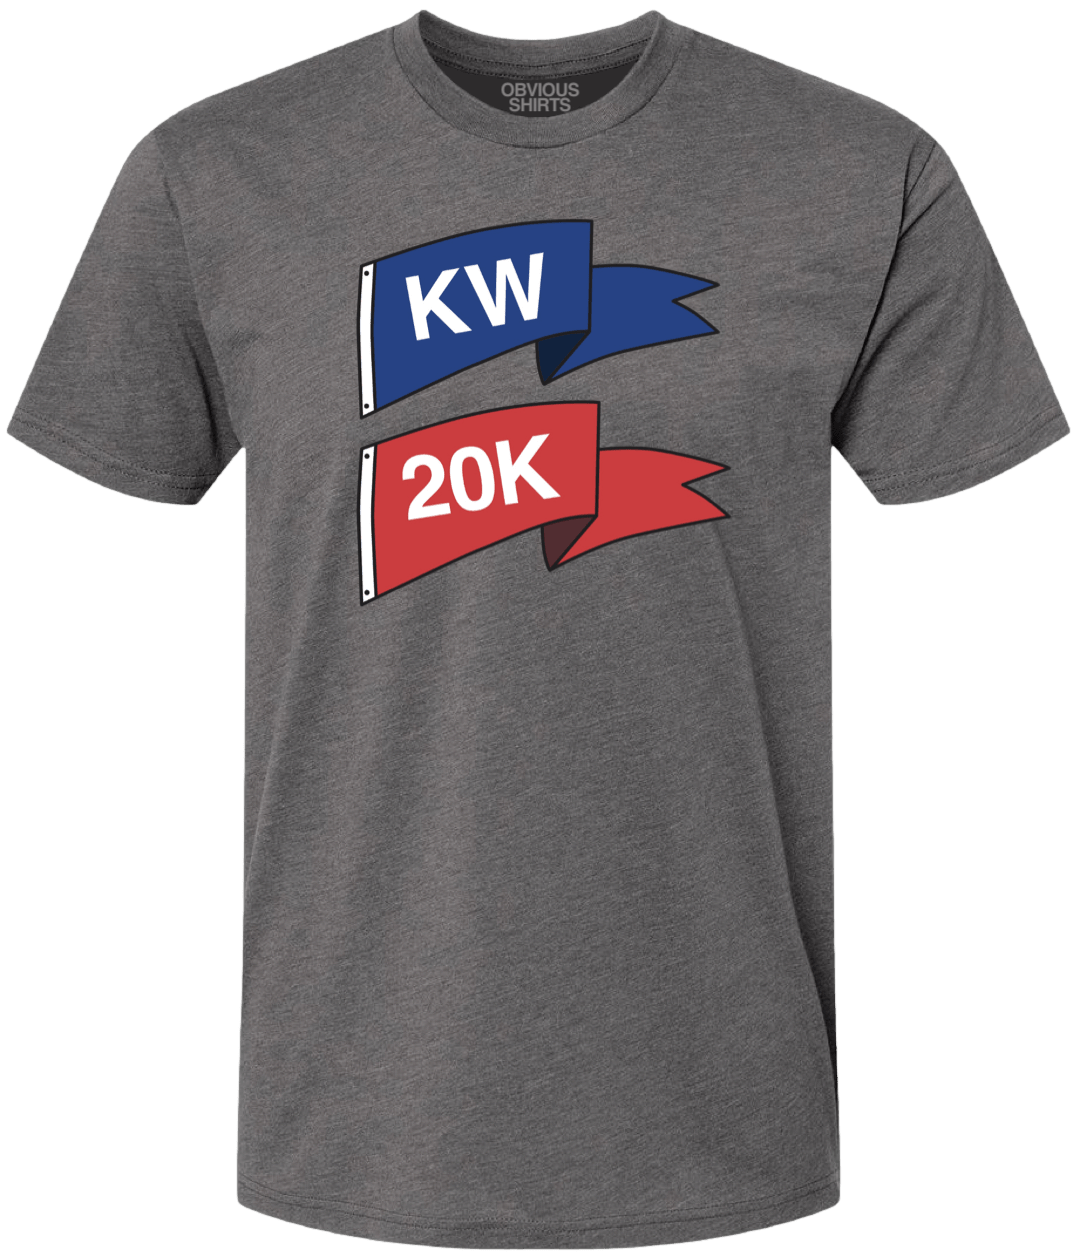 KW 20K FLAGS. - OBVIOUS SHIRTS